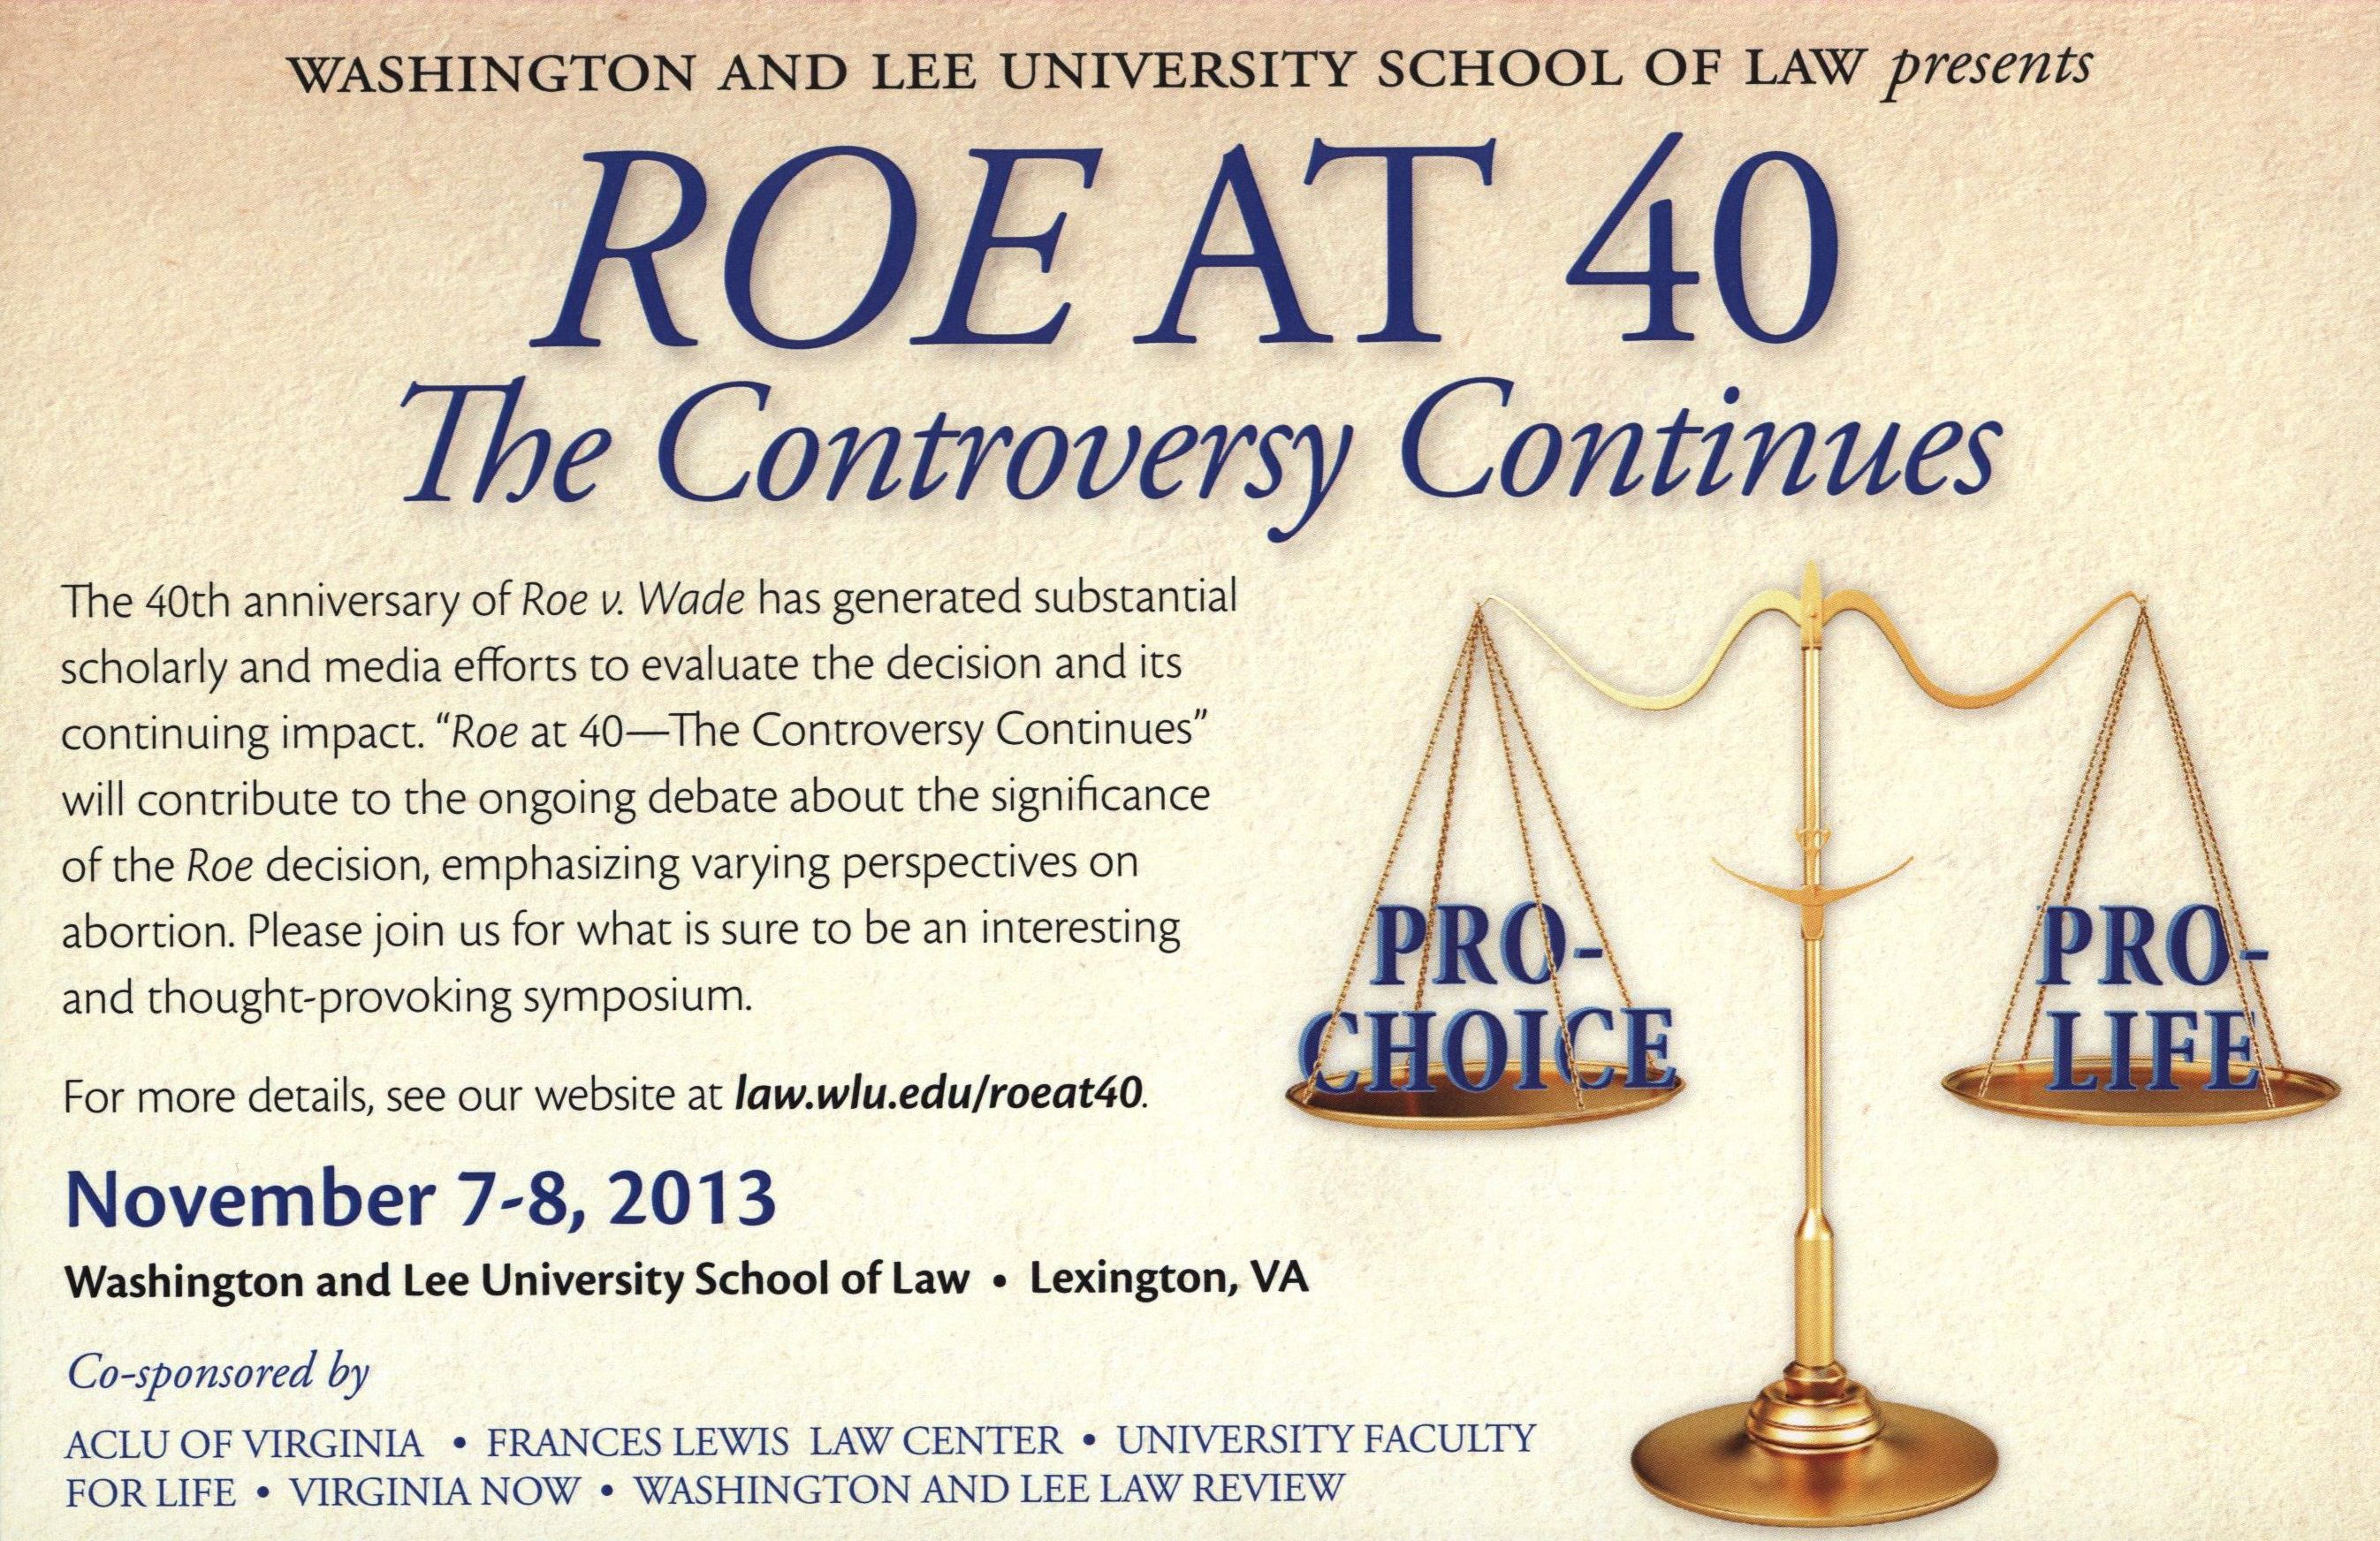 Roe at 40: The Controversy Continues